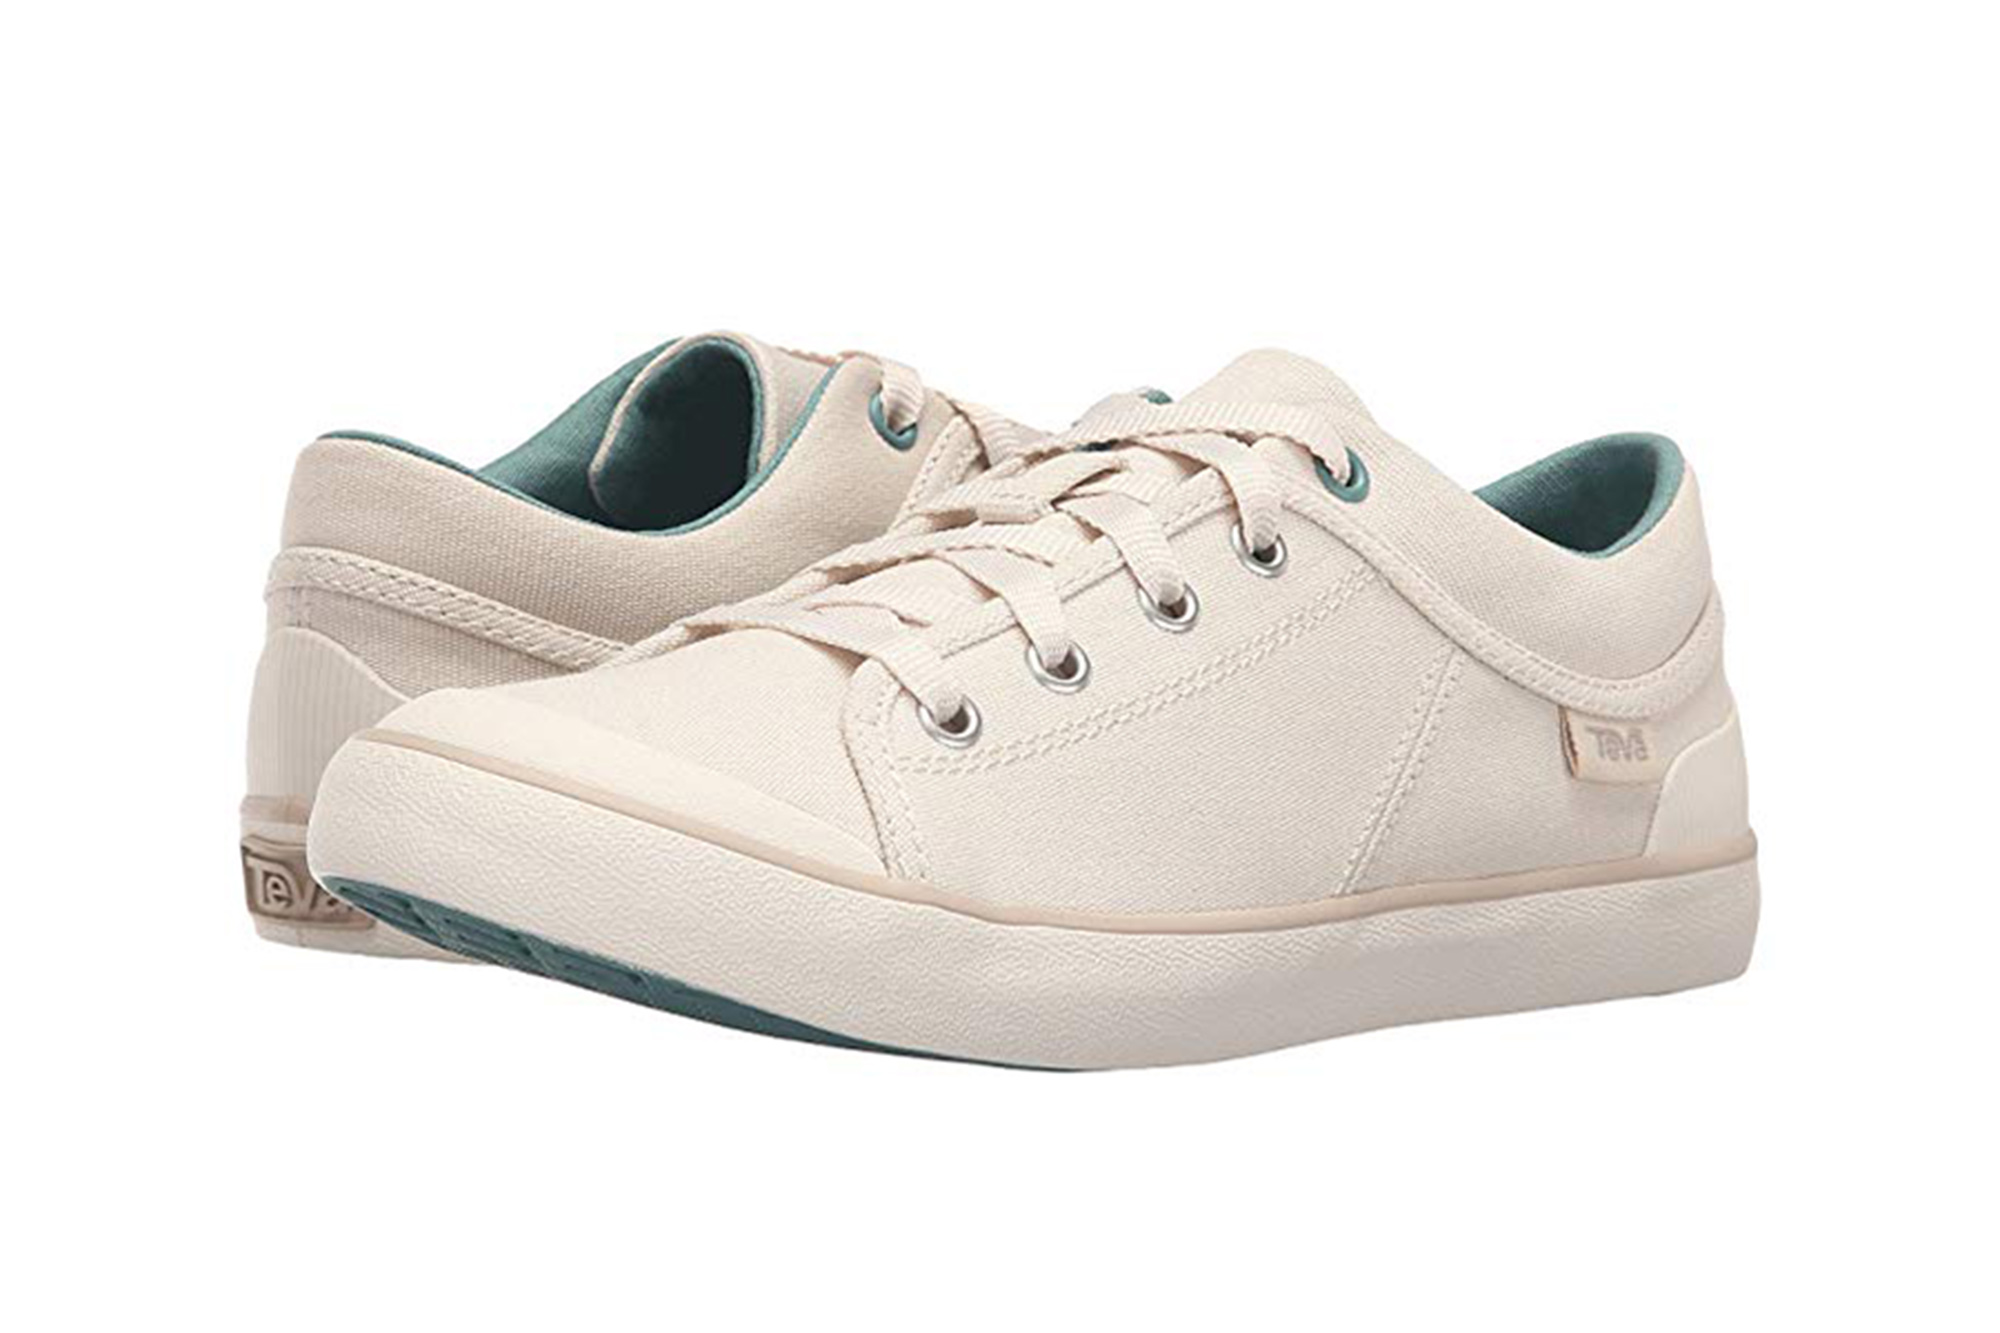 Reviewers Say Search for a Comfy-Chic Sneaker Ended With This Pair